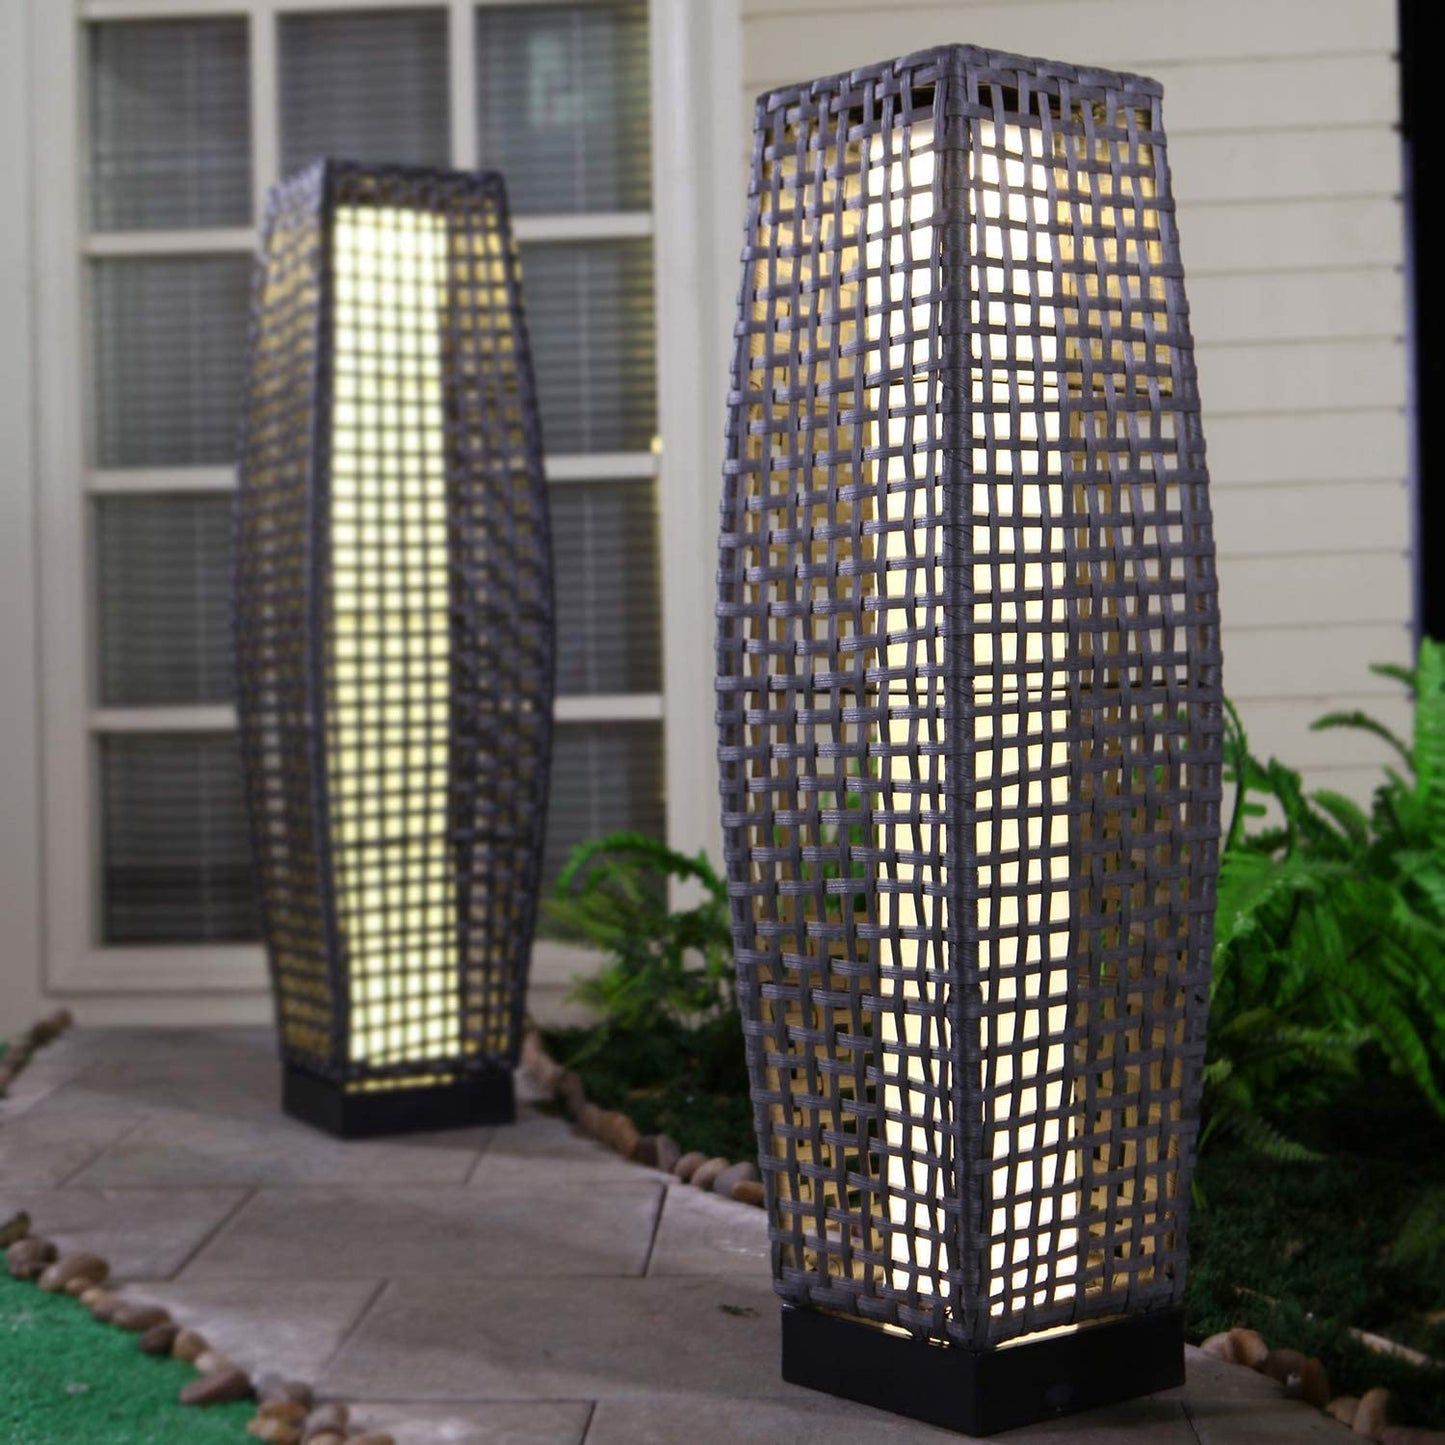 Grand patio Outdoor Solar-Powered Woven Resin Wicker Floor Lamp for Deck, Garden, Lawn, Driveway, Pool, Porch